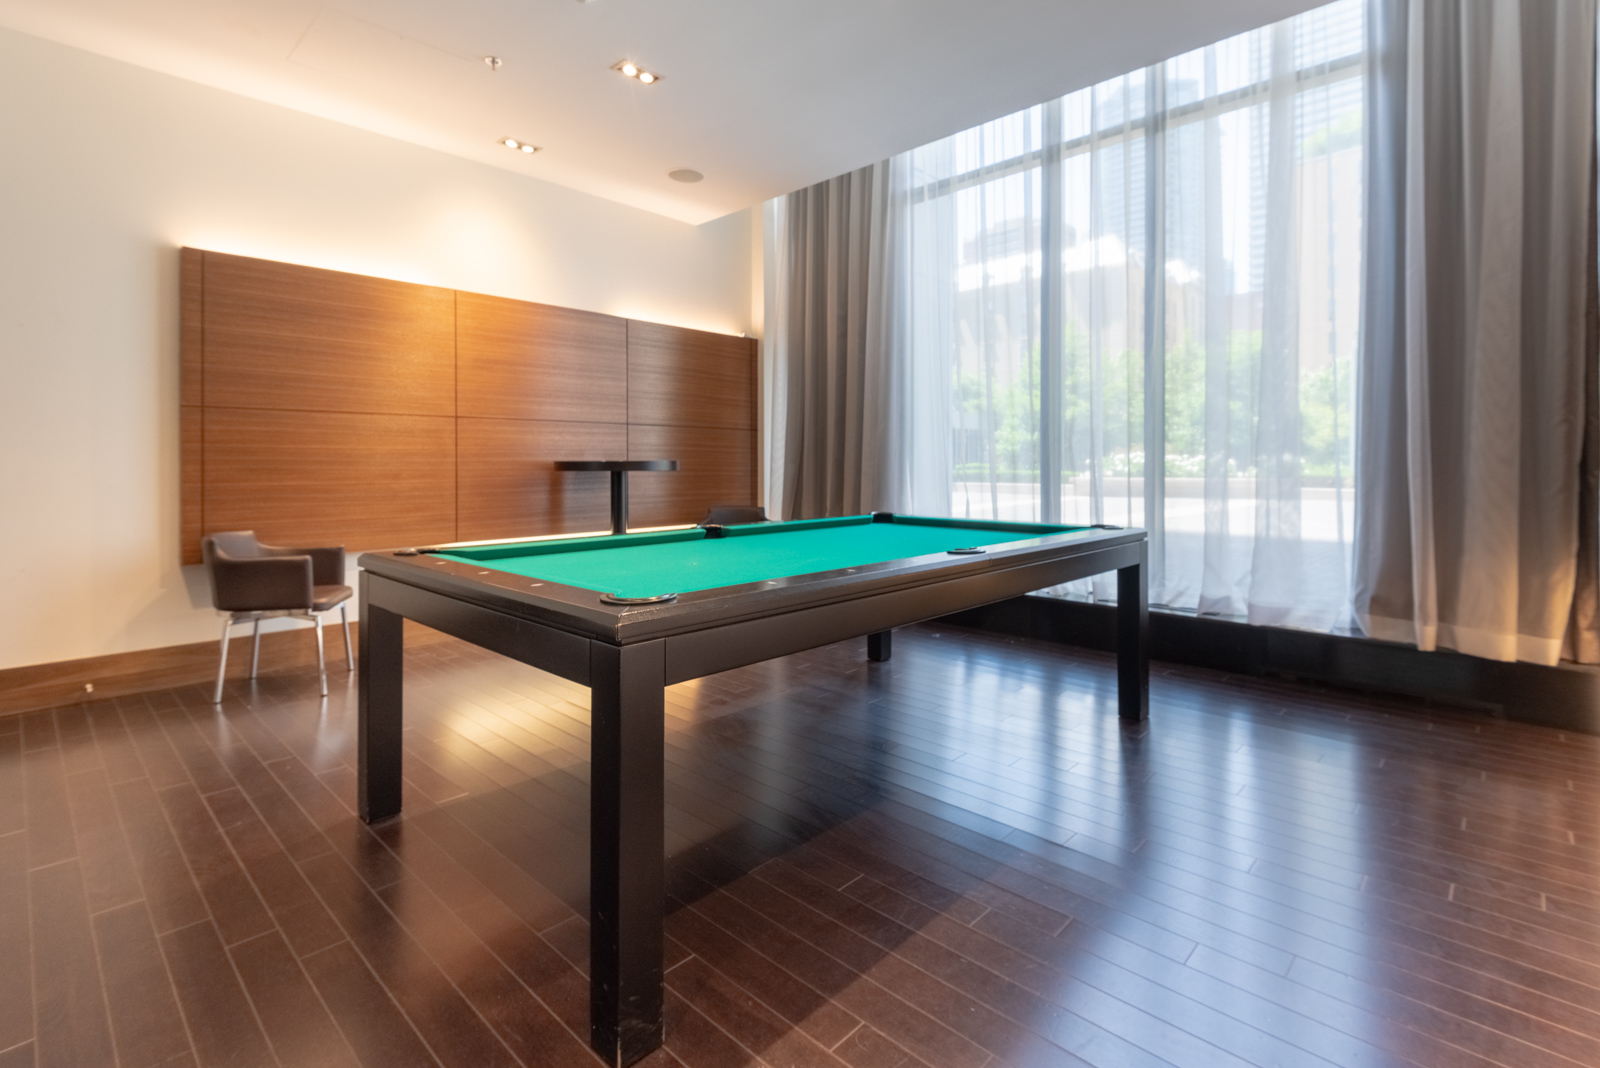 Empty room with large billiards table with green surface and dark brown floors at The Couture.